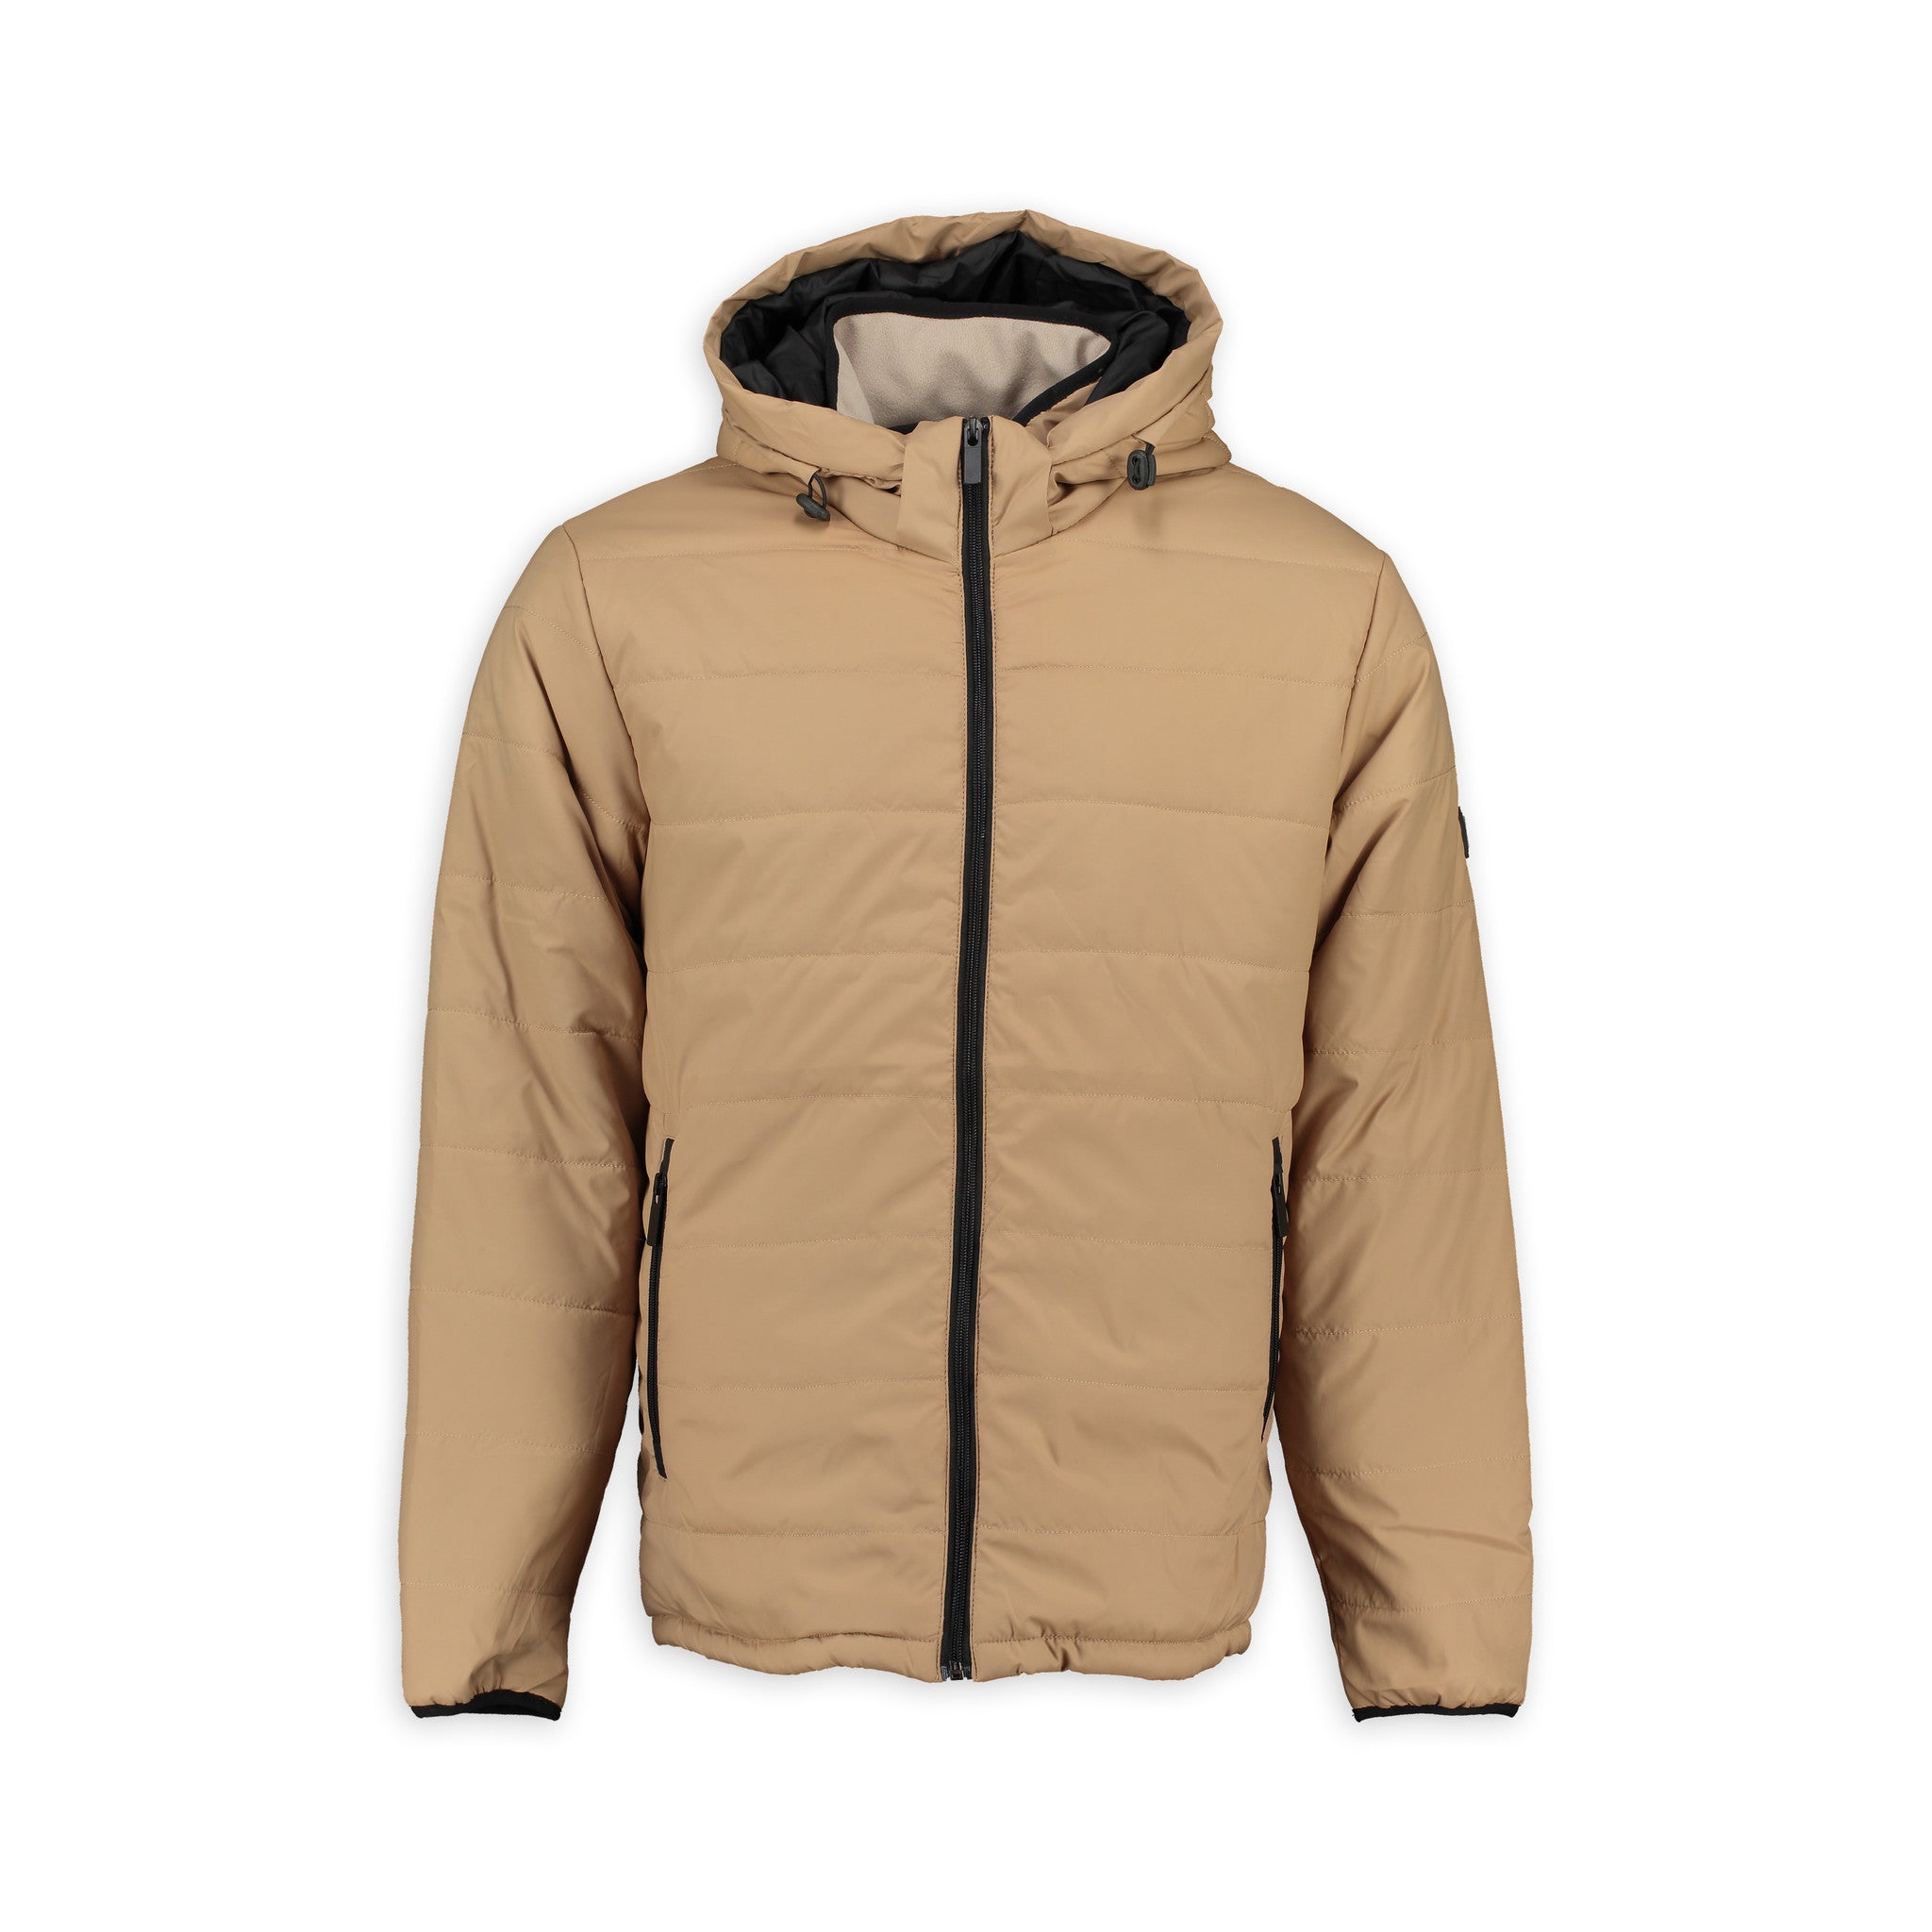 Aspact Expedition Jacket Beige